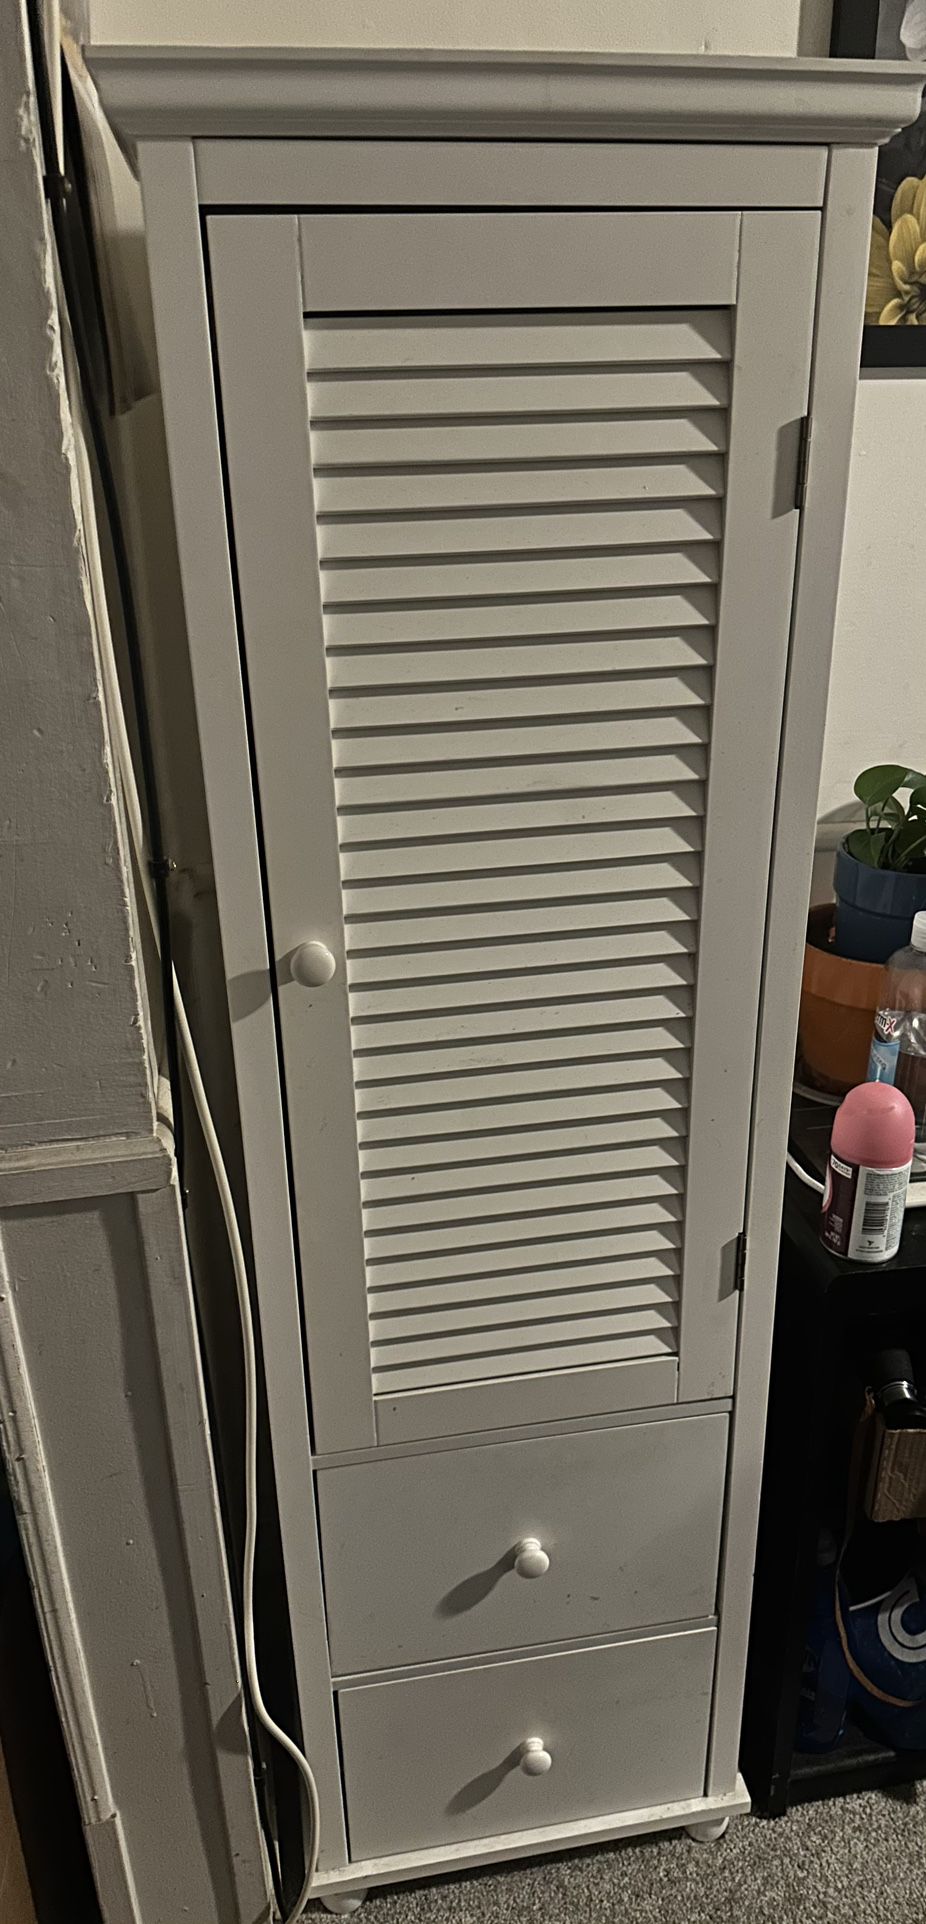 Storage Cabinet With Drawers